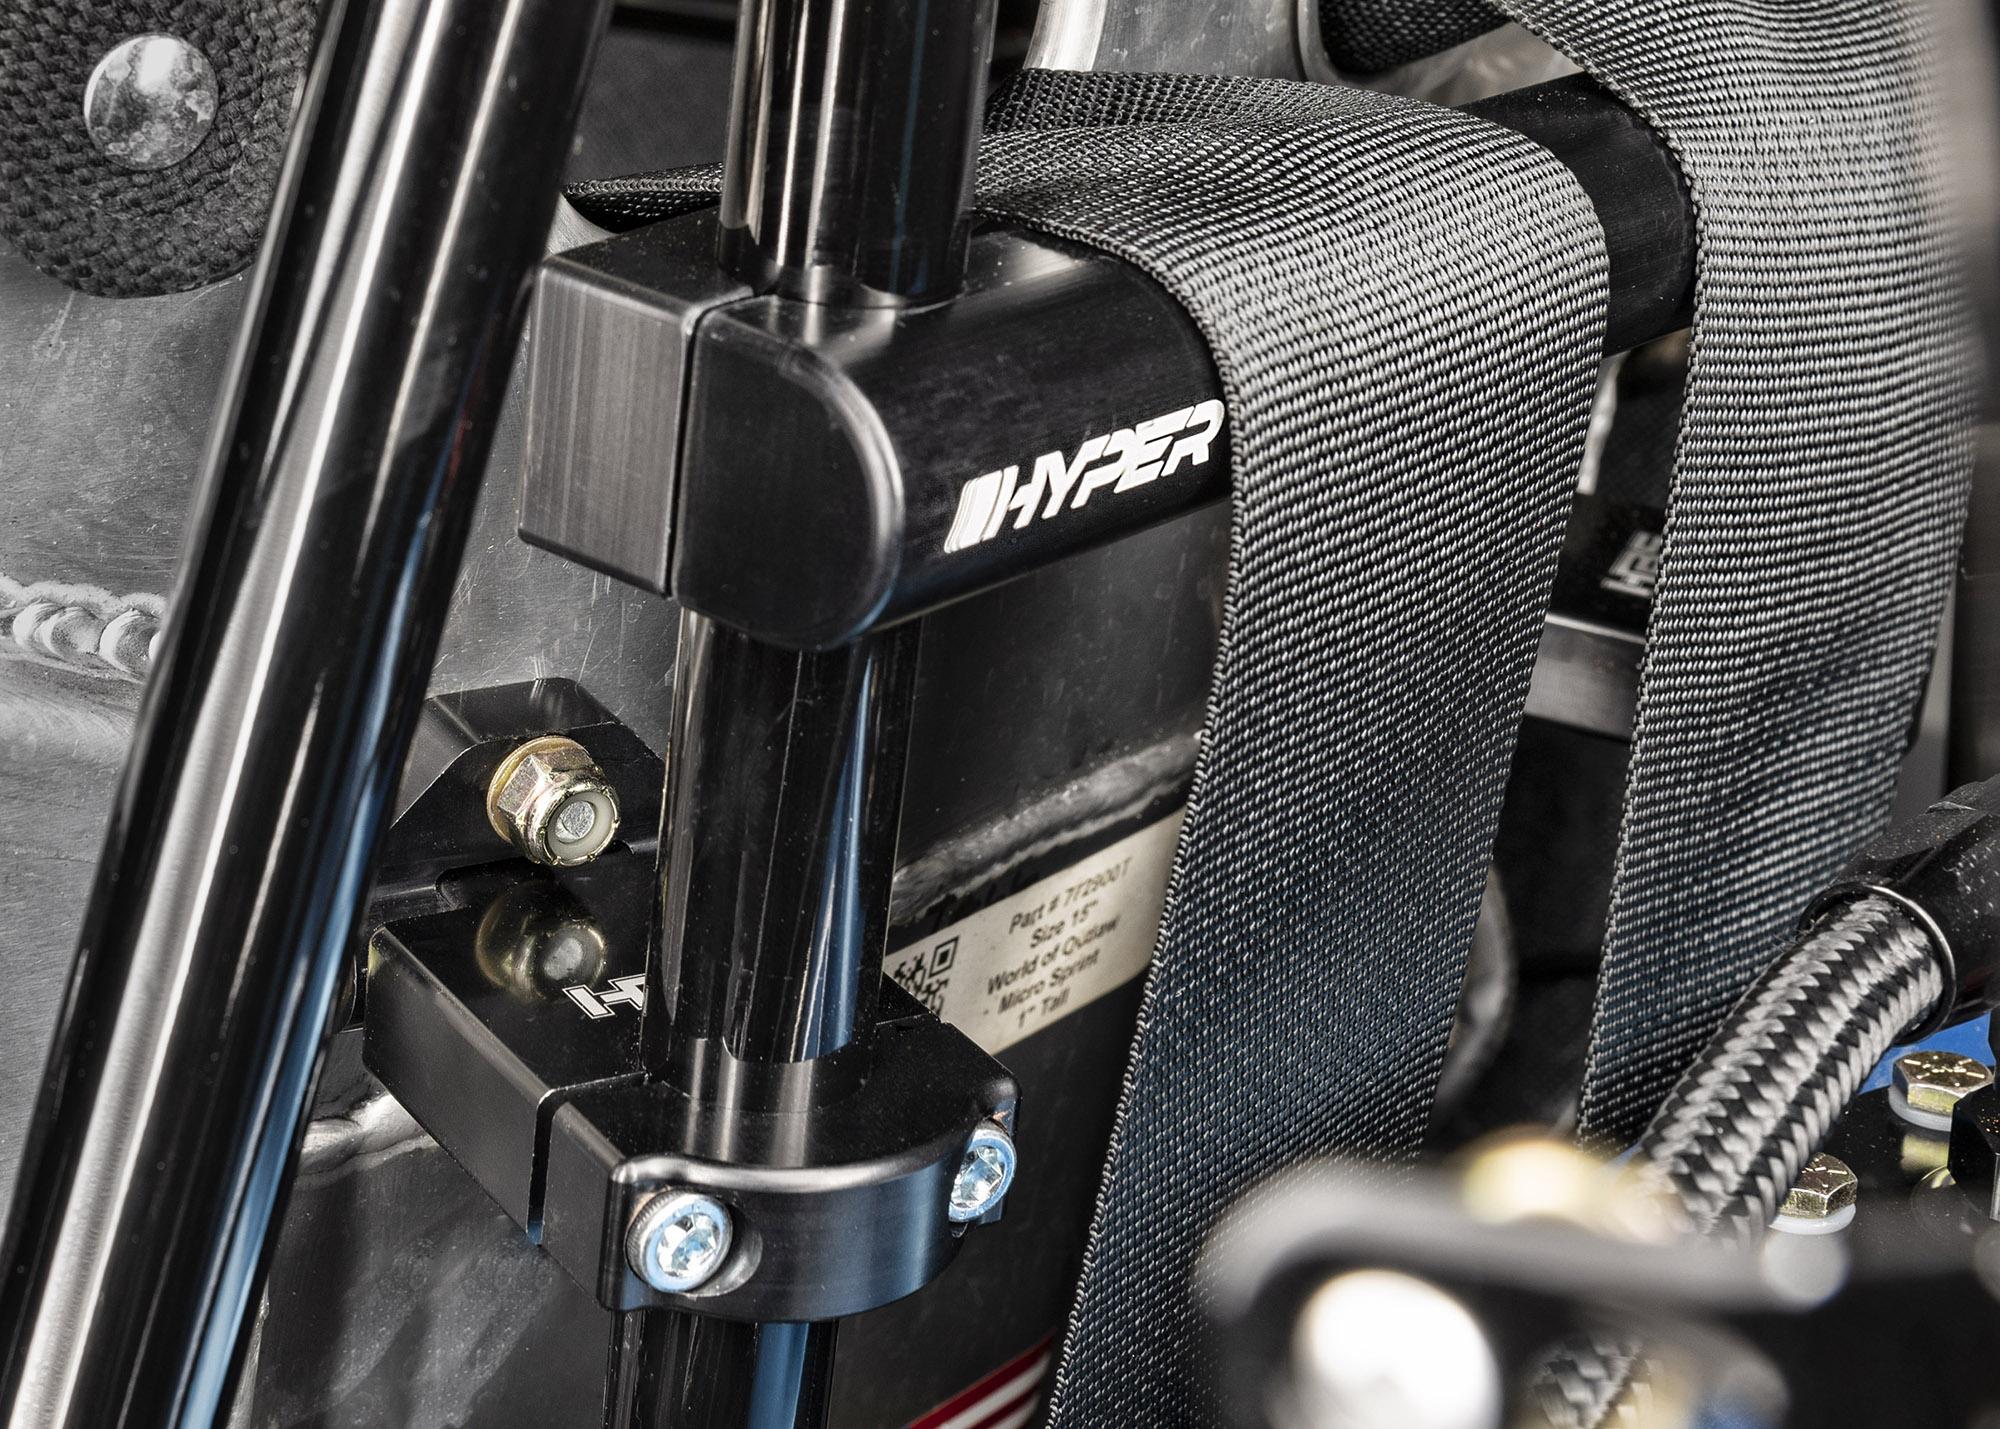 Introduced in 2019, adjustable upper seat belt bar allows perfect placement for the seat belts reguardless of driver height.